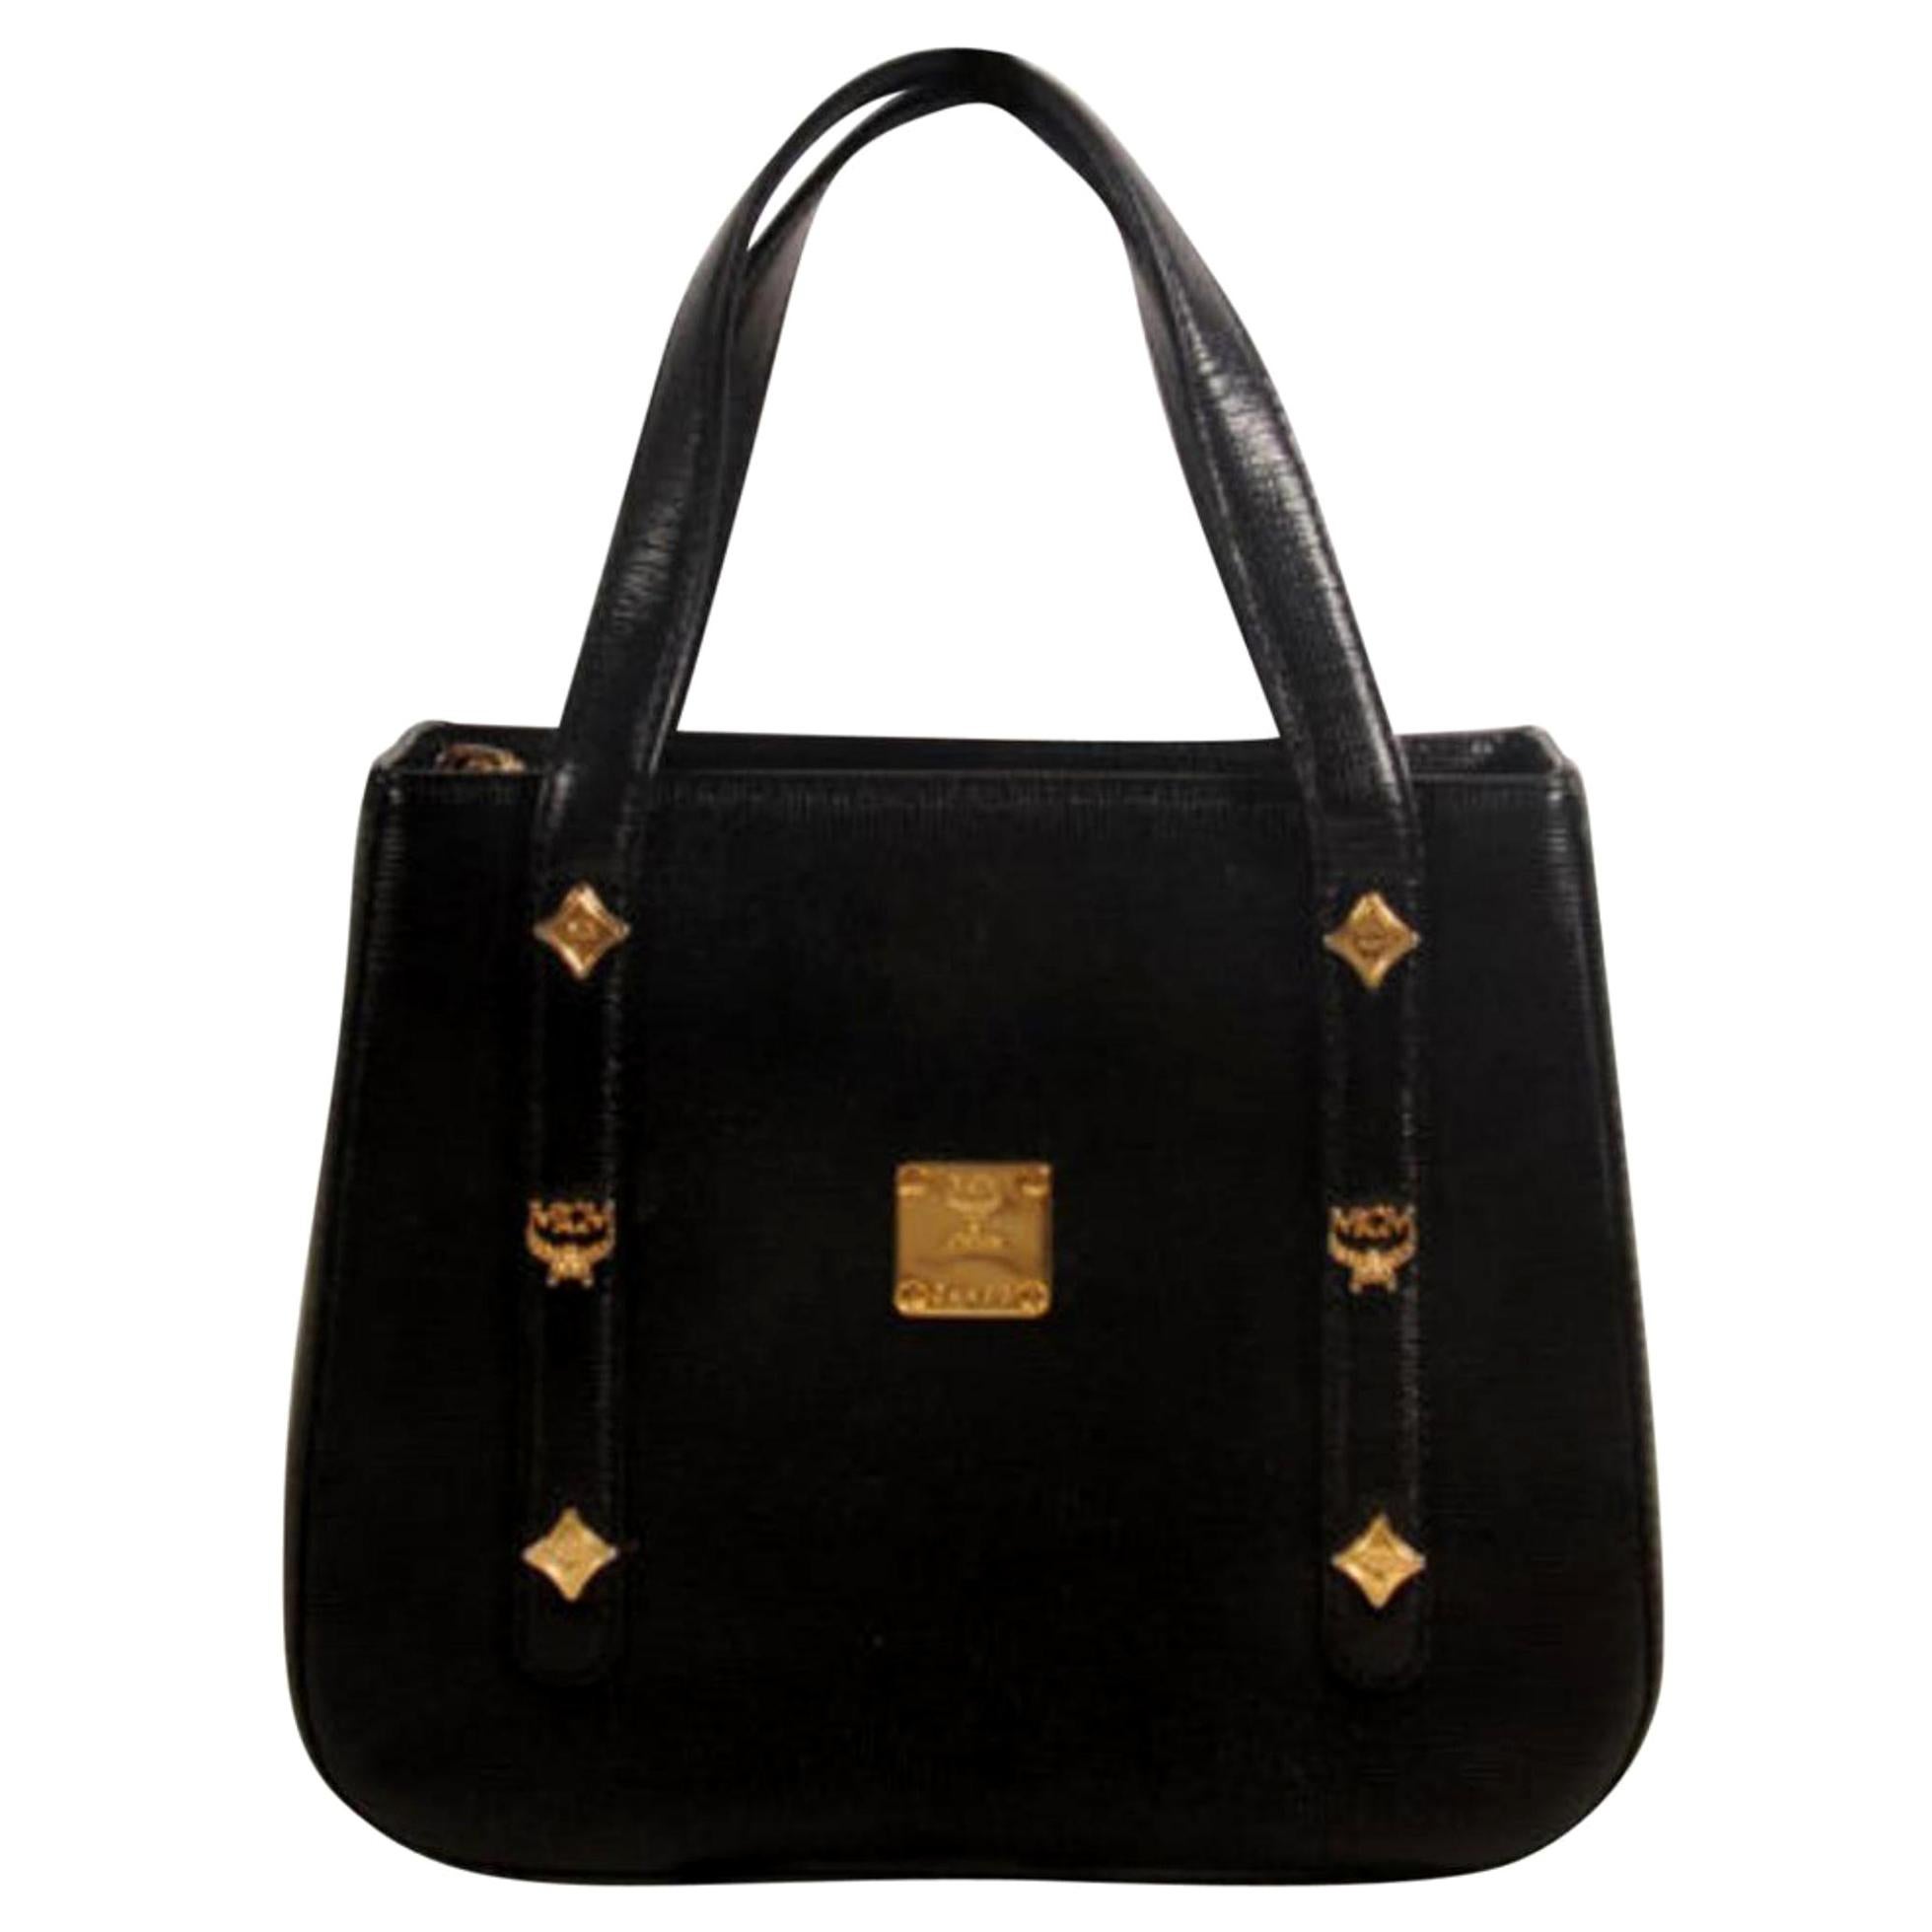 MCM Studded 869337 Black Leather Tote For Sale